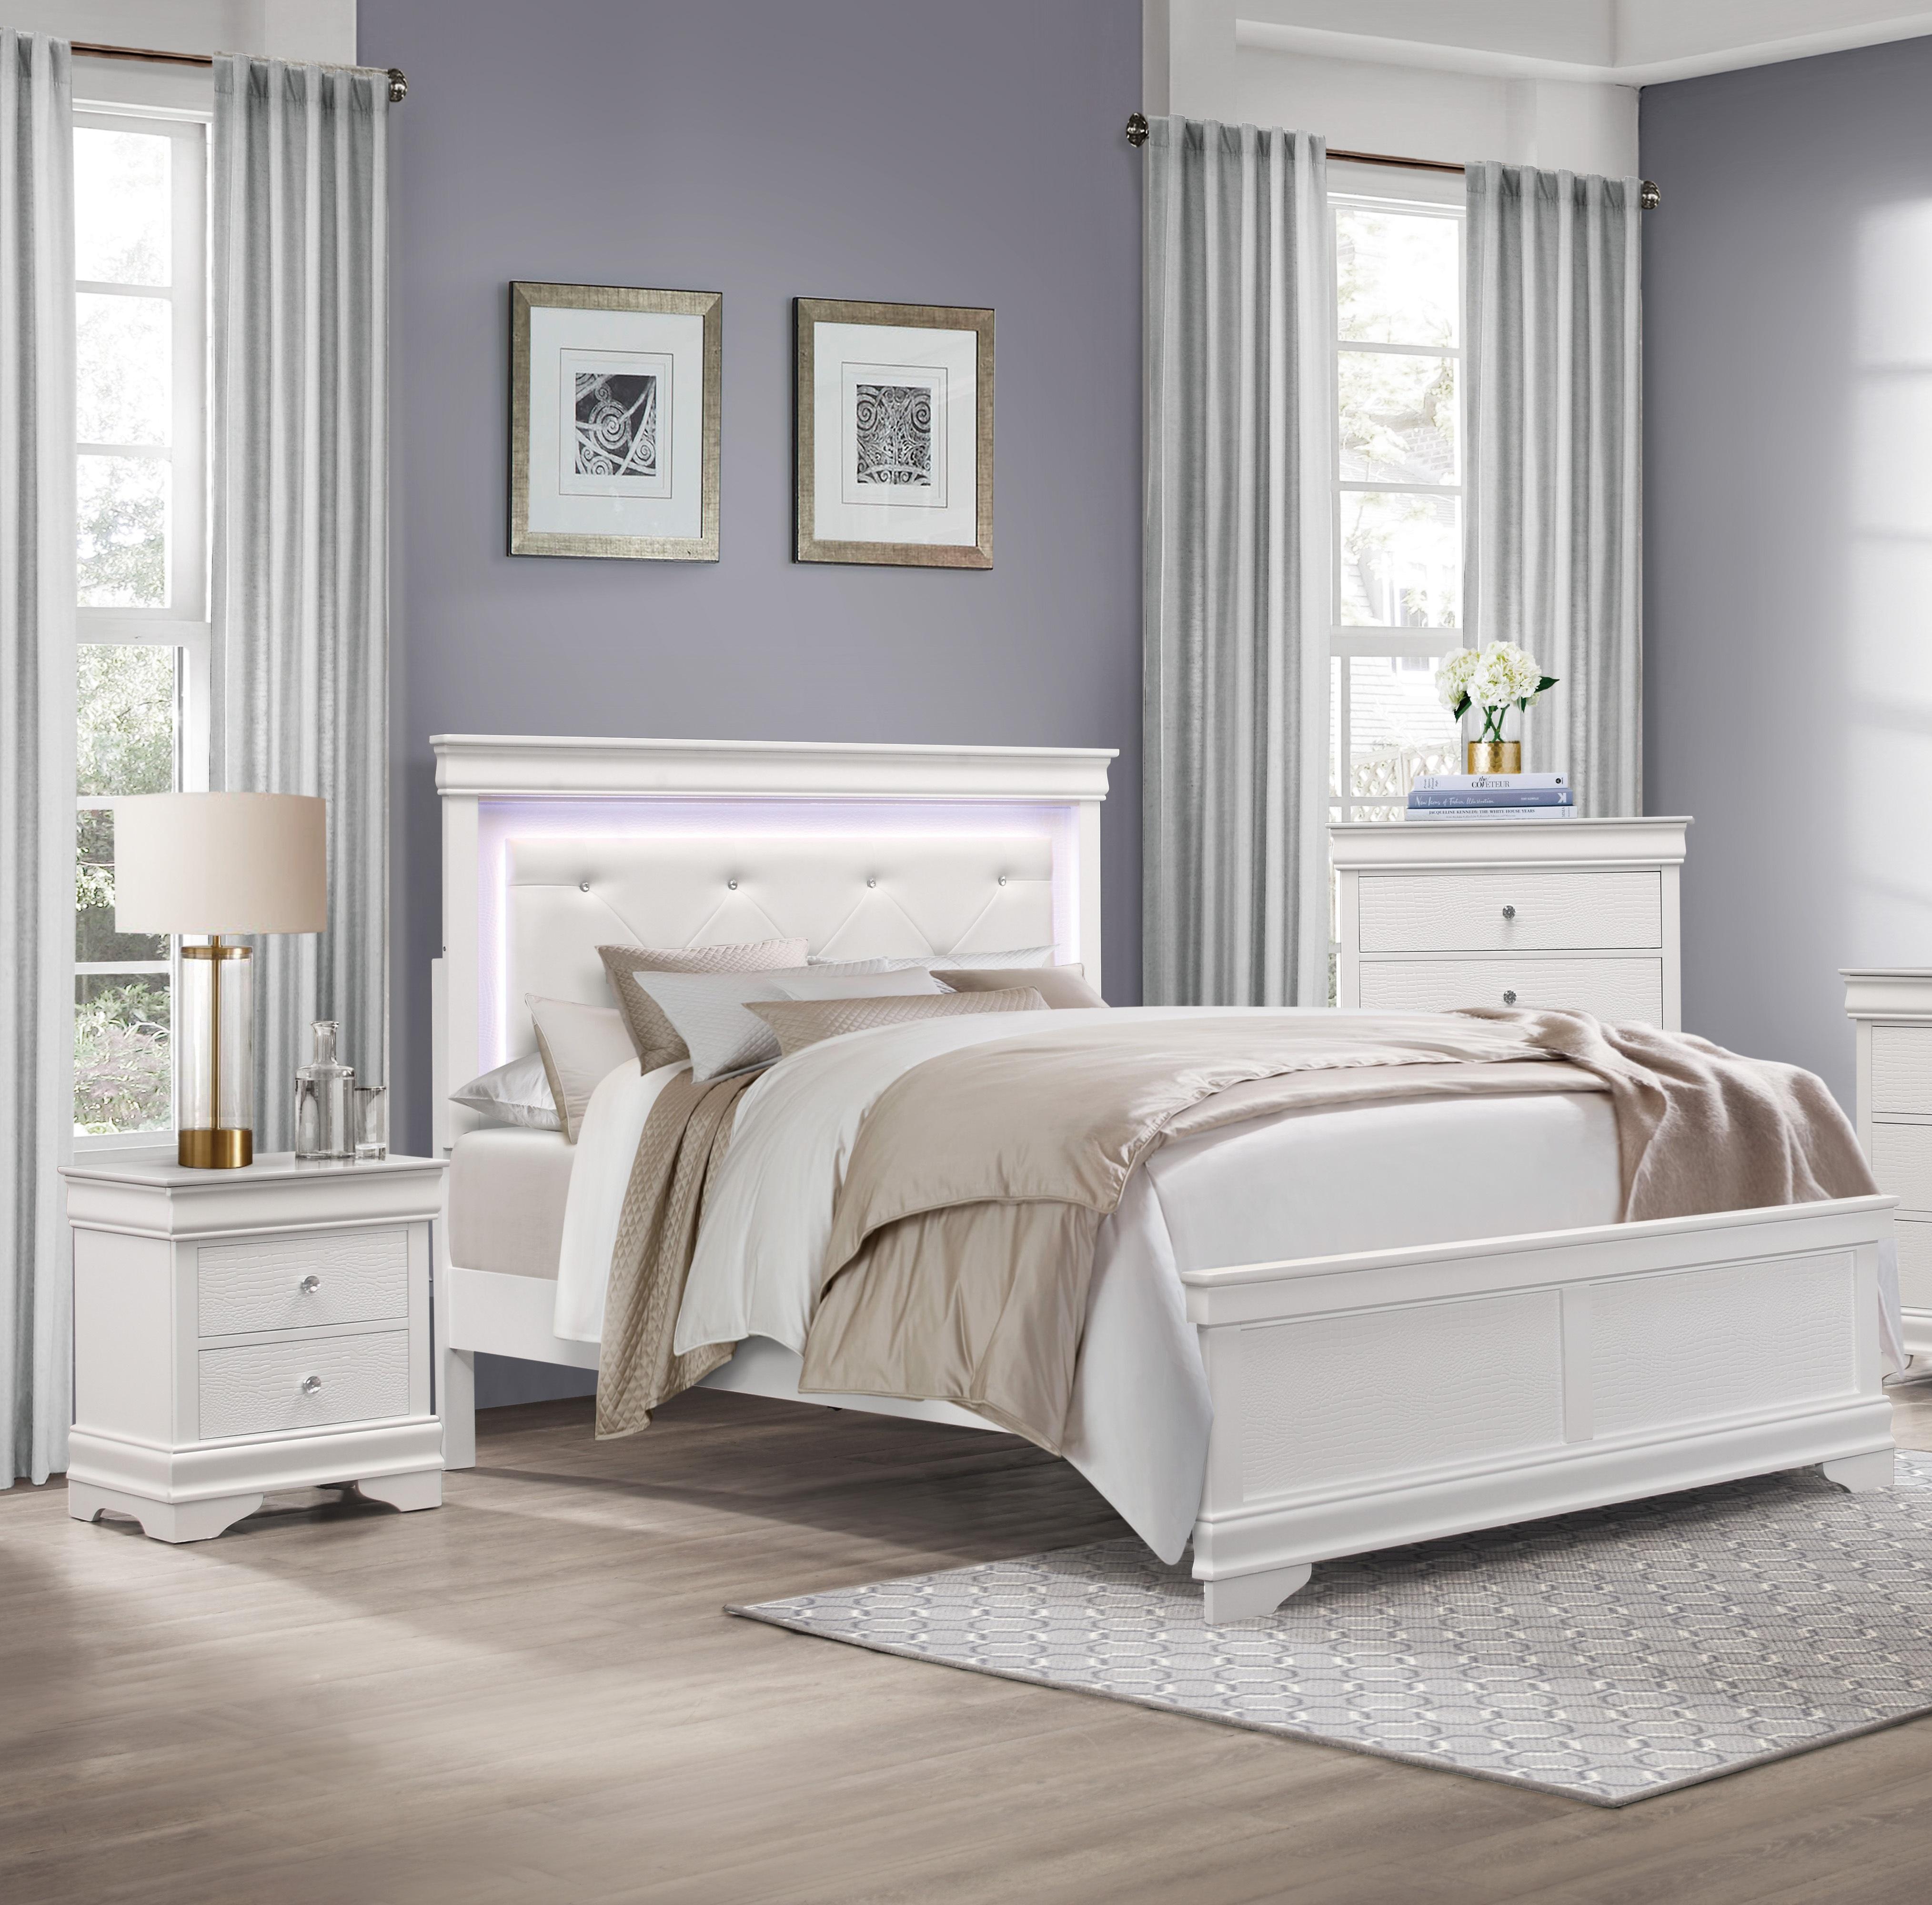 Traditional Bedroom Set 1556WK-1CK-3PC Lana 1556WK-1CK-3PC in White Faux Leather